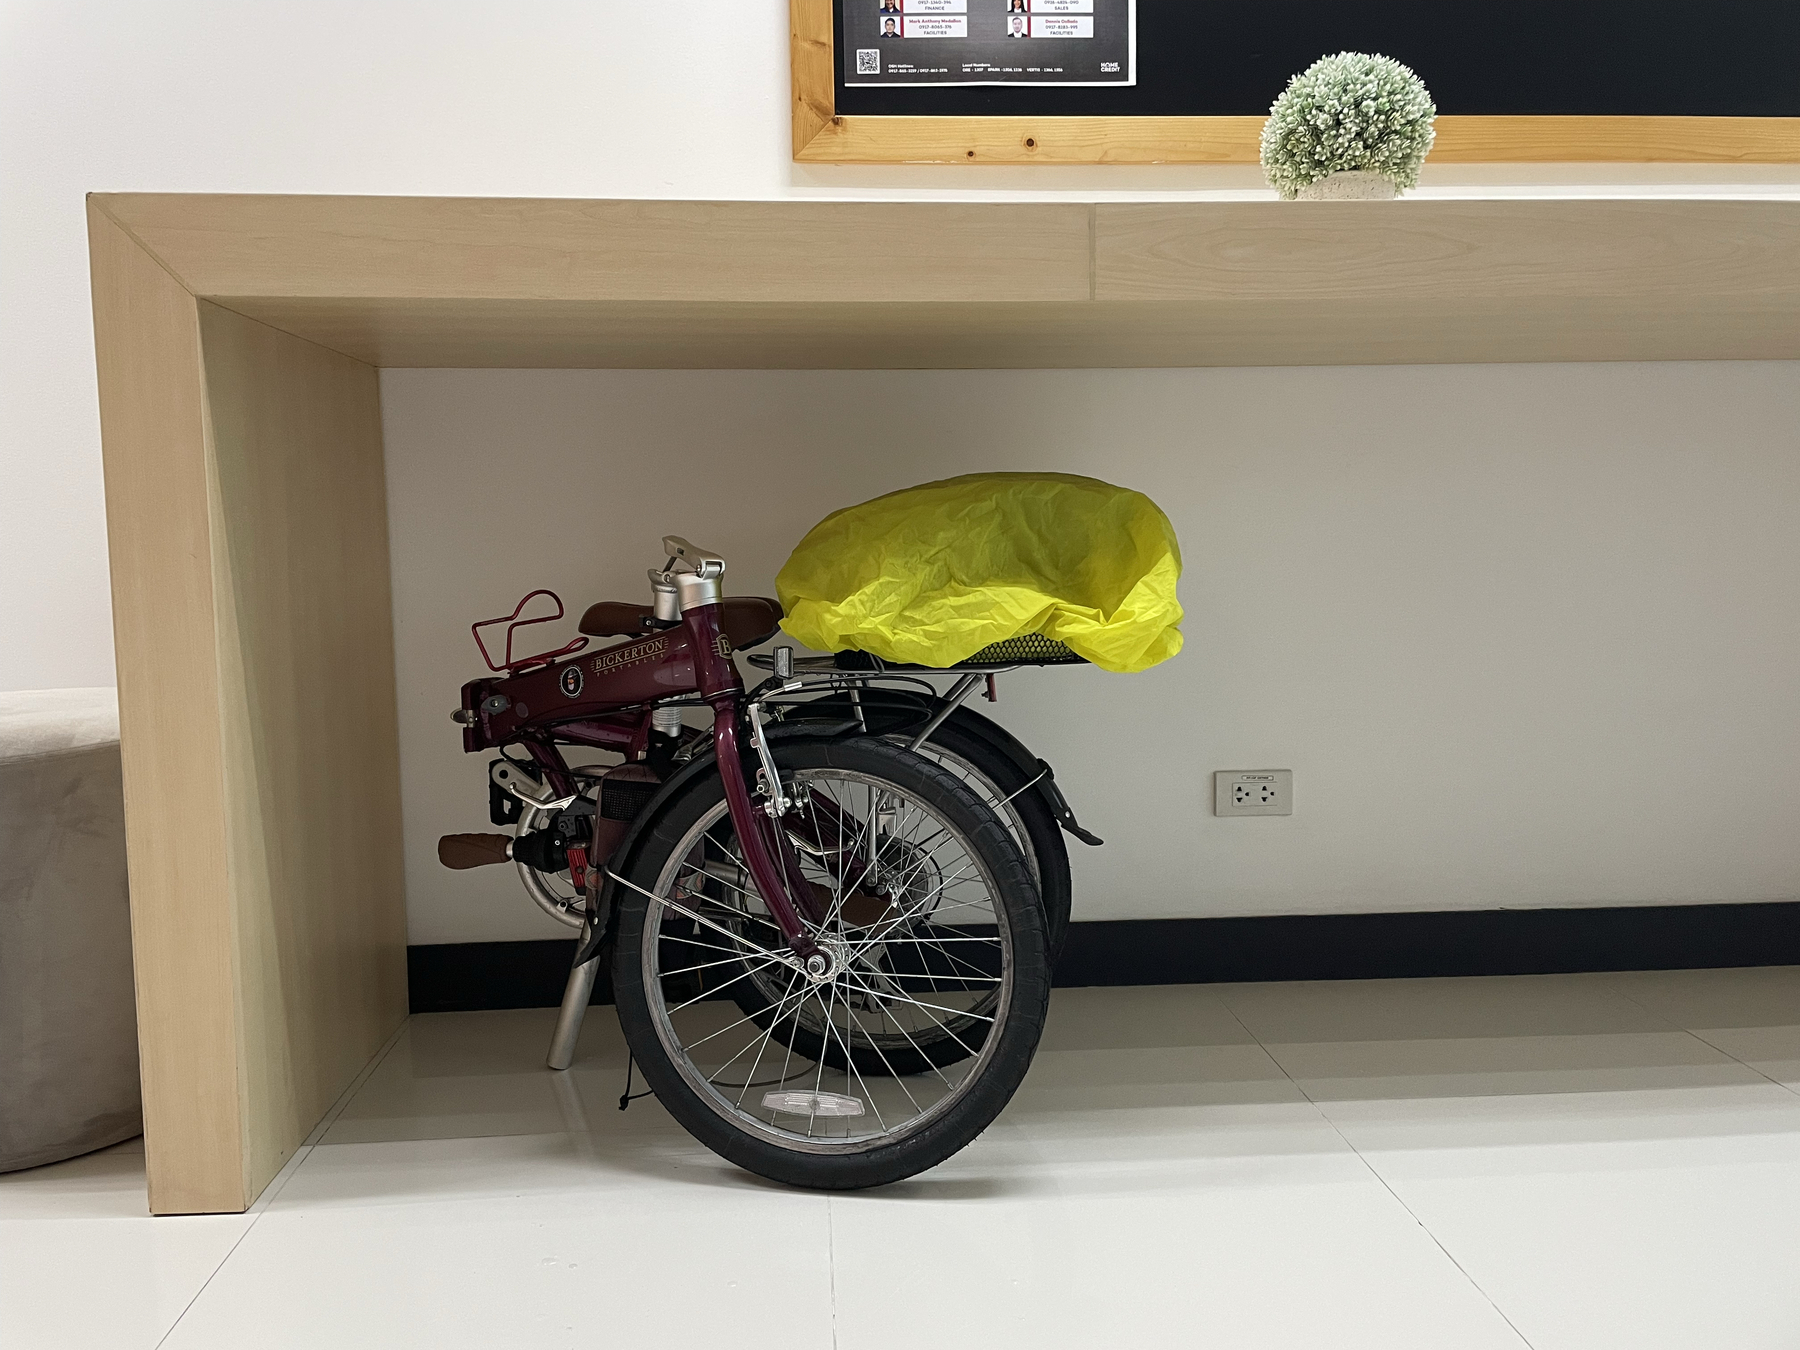 Chi’s folding bike neatly tucked under a wall table